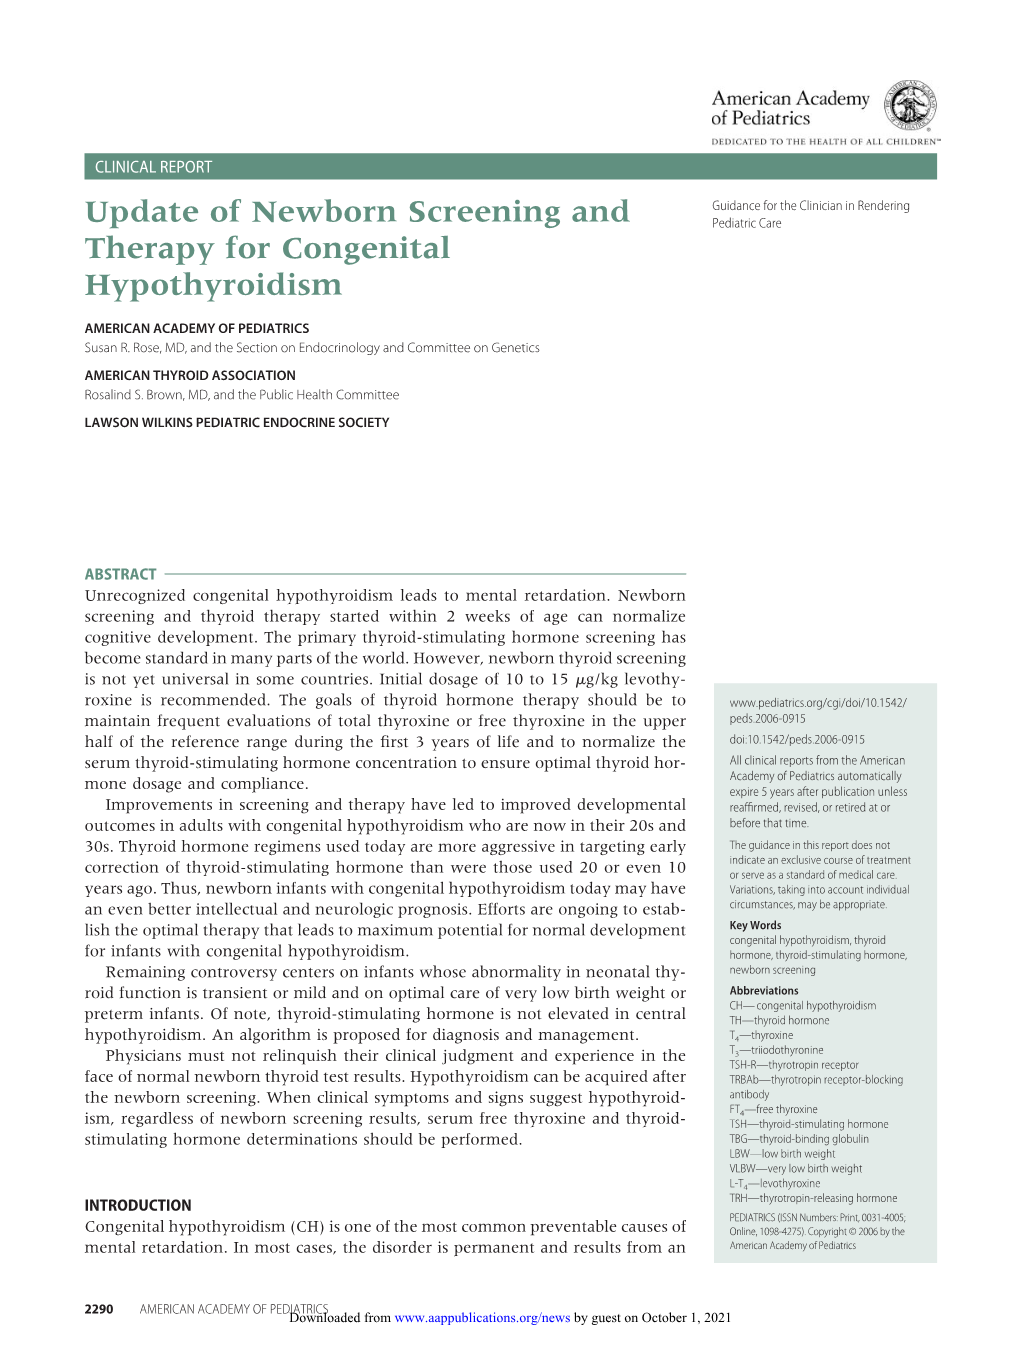 Update of Newborn Screening and Therapy for Congenital Hypothyroidism American Academy of Pediatrics, Susan R